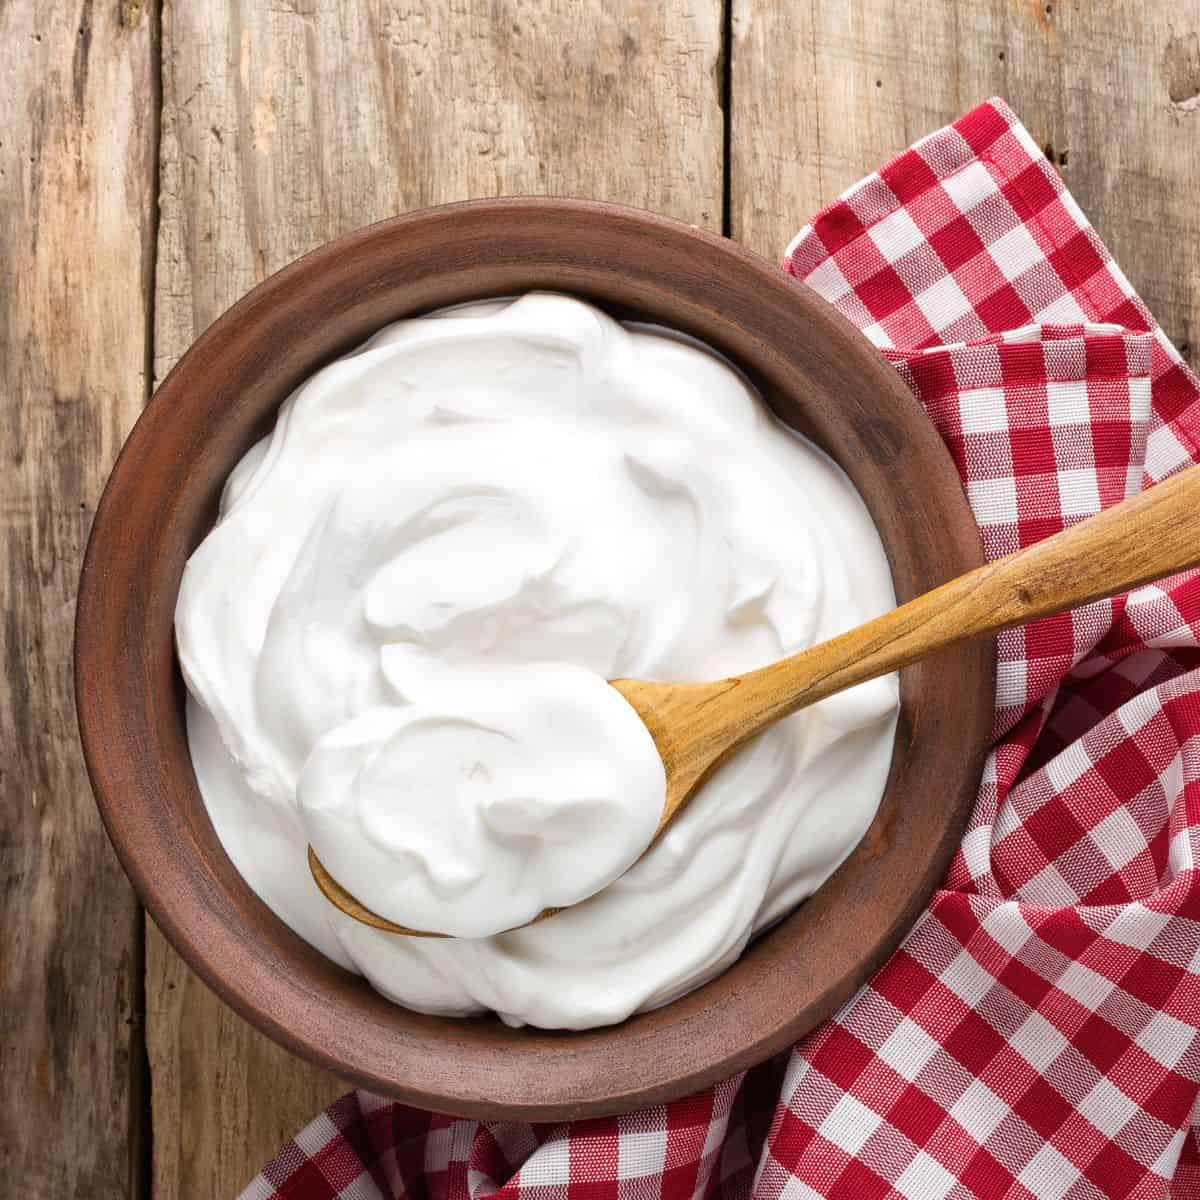 Plain curd / yogurt placed in an eartherware bowl and a wooden spoon scooping some of the curd.